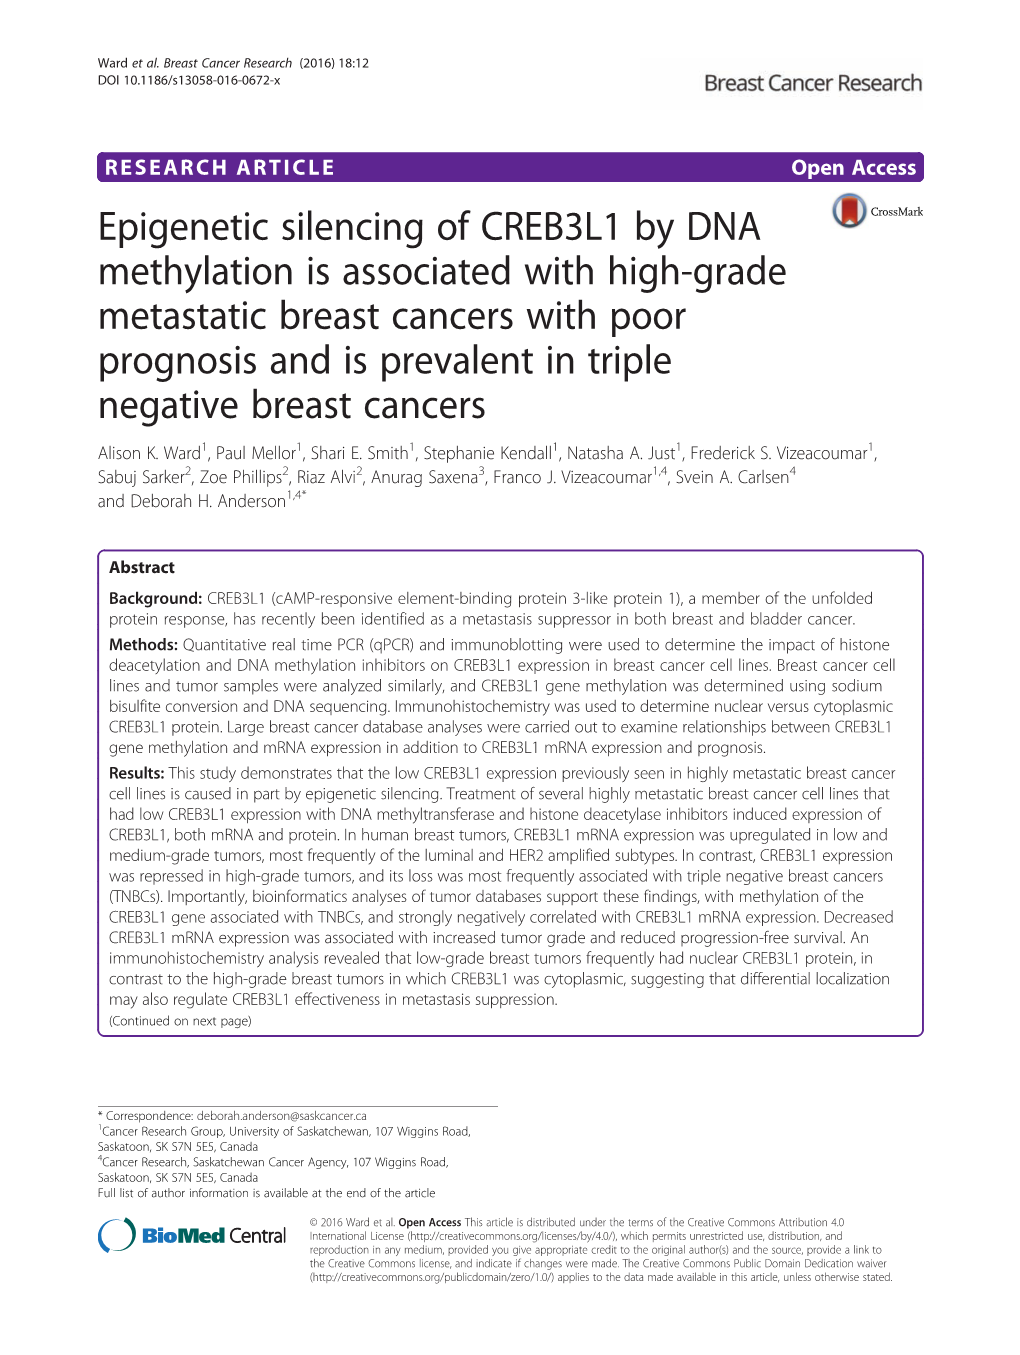 Epigenetic Silencing of CREB3L1 by DNA Methylation Is Associated With